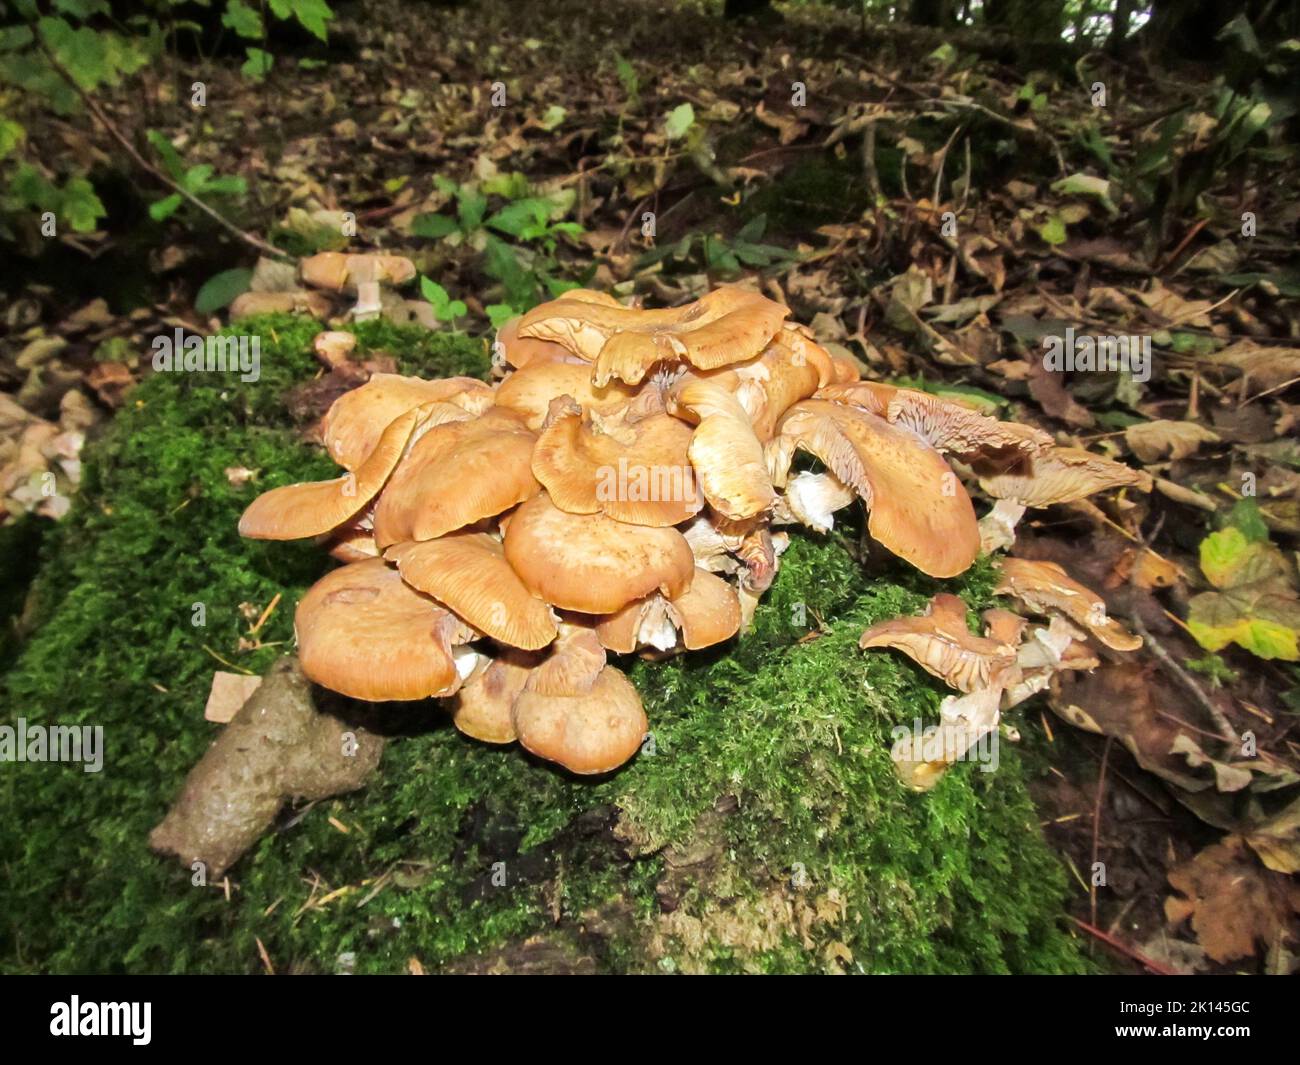 A group of wild mushroom, growing on a moss covered tree stump in the woodland just outside Stonehaven, Scotland. Stock Photo